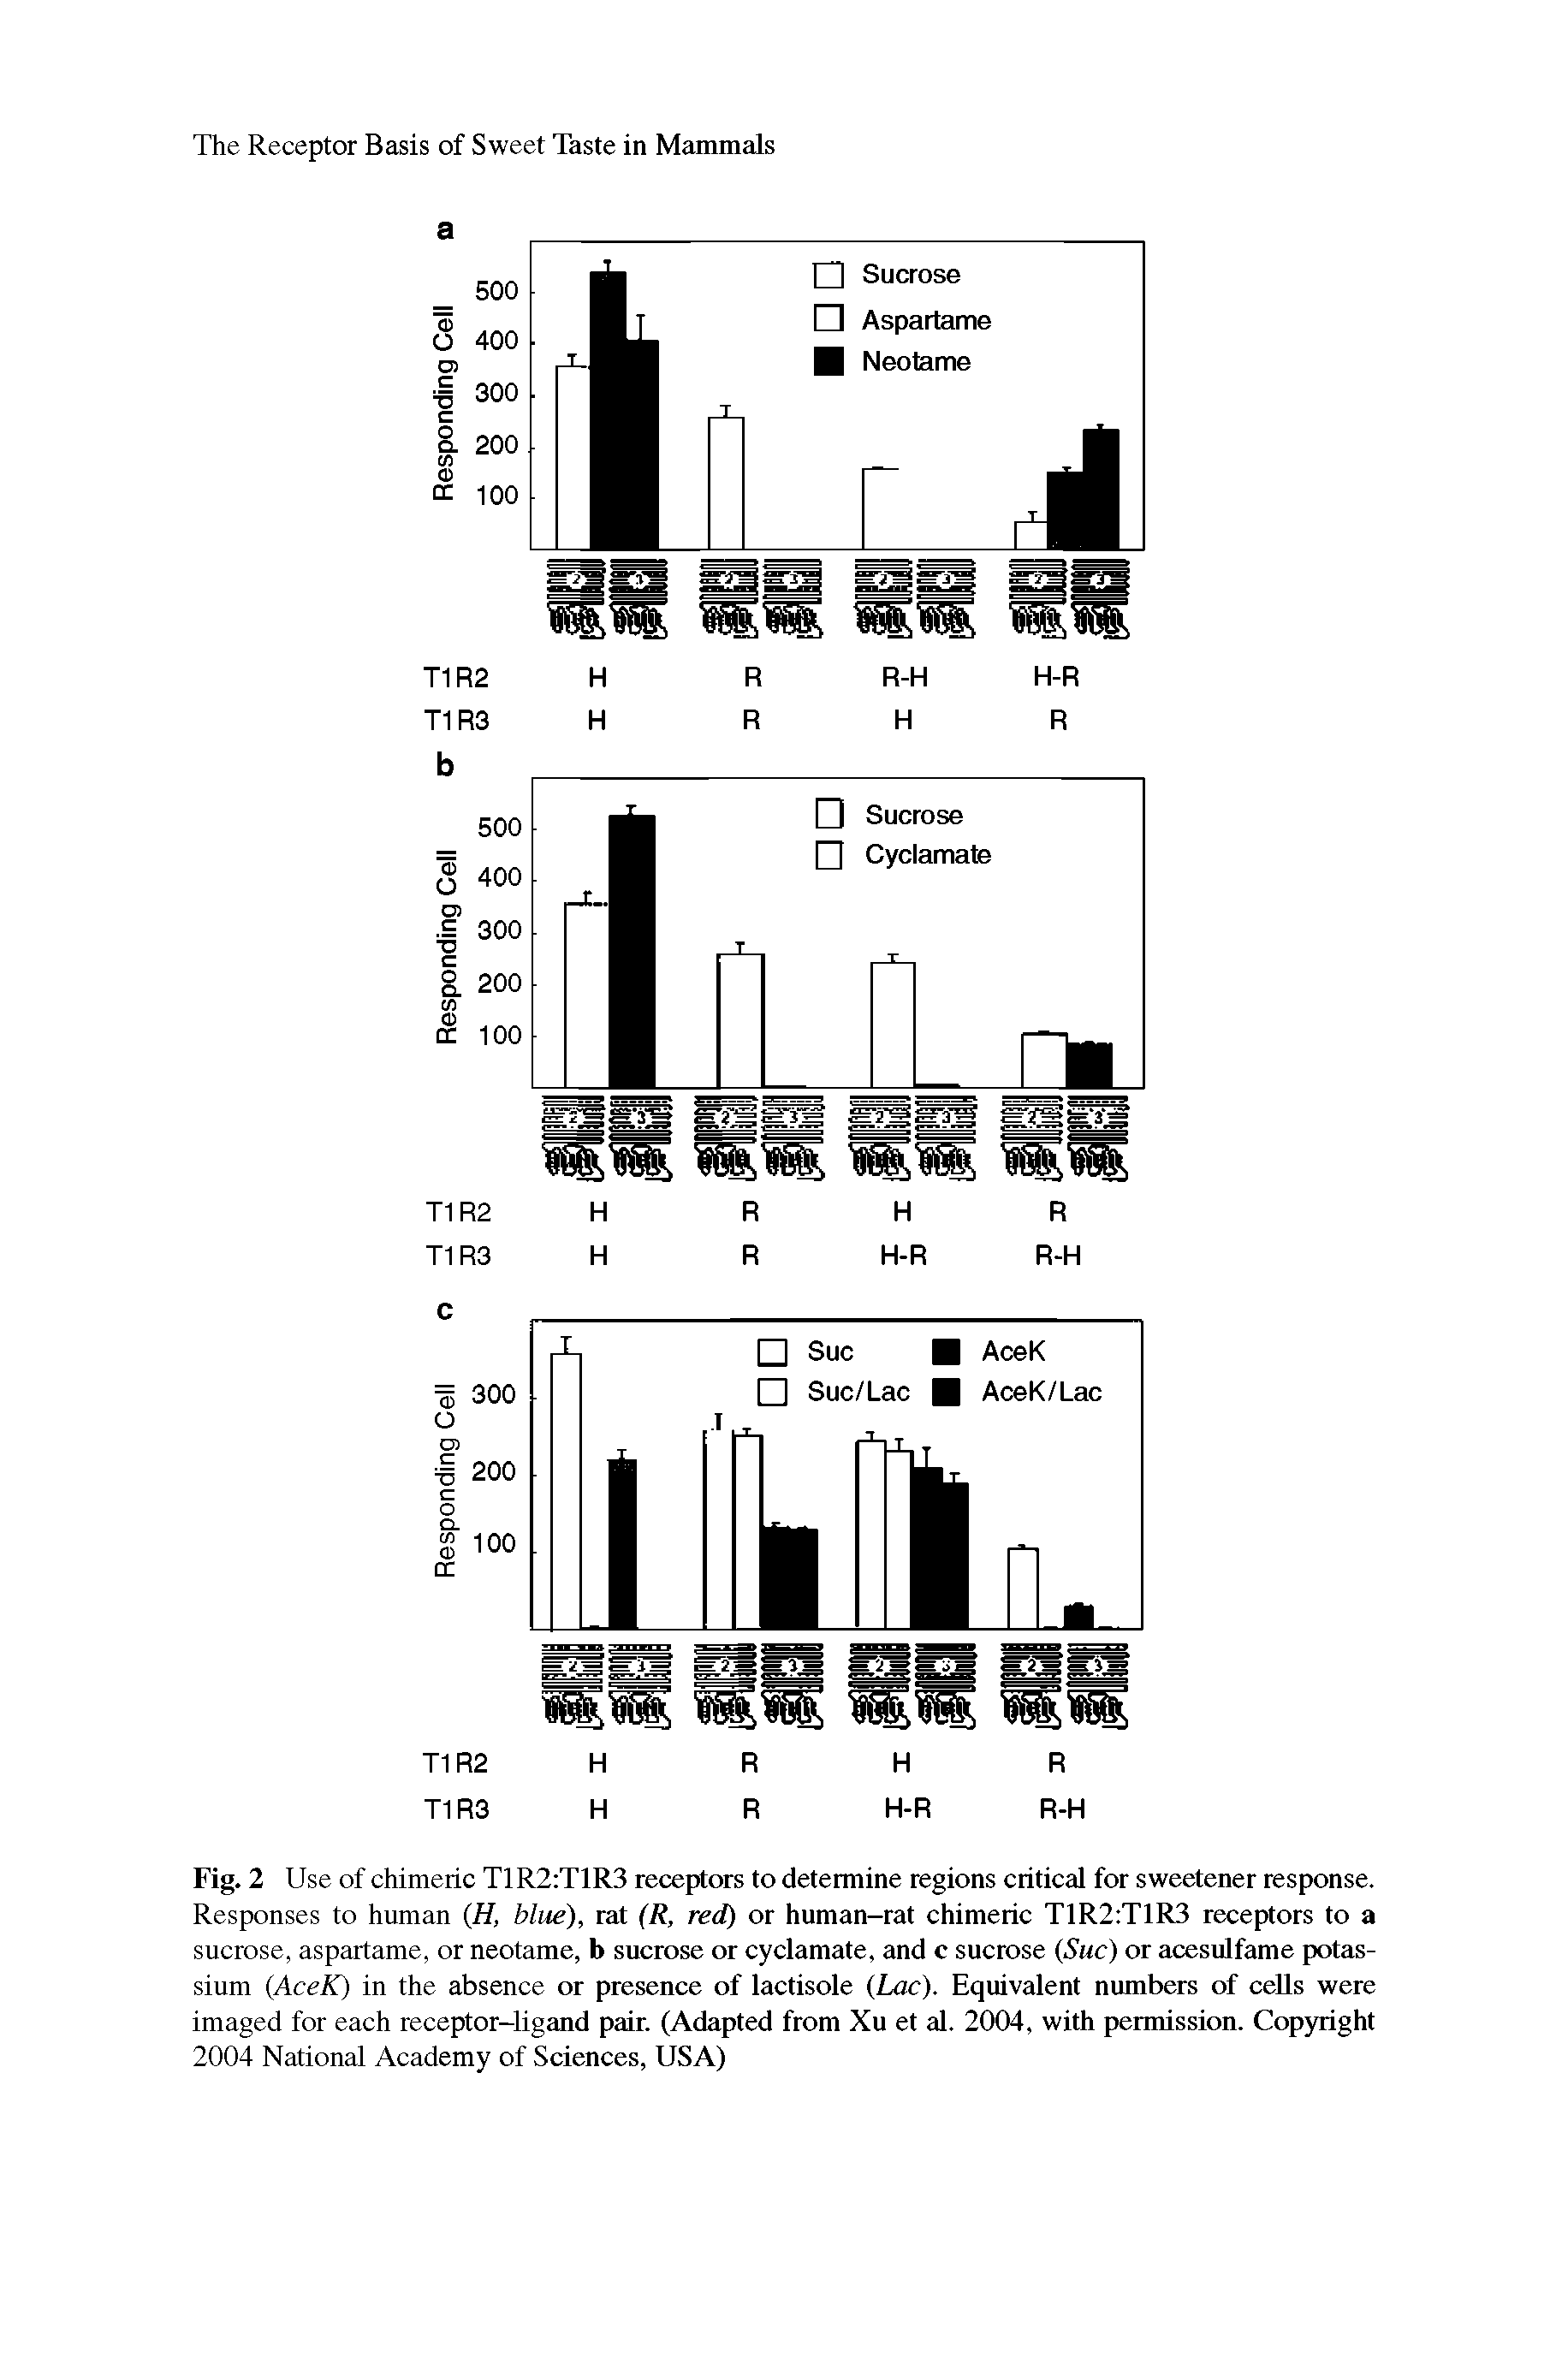 Fig. 2 Use of chimeric T1R2 T1R3 receptors to determine regions critical for sweetener response. Responses to human (H, blue), rat (R, red) or human-rat chimeric T1R2 T1R3 receptors to a sucrose, aspartame, or neotame, b sucrose or cyclamate, and c sucrose (Sue) or acesulfame potassium (AceK) in the absence or presence of lactisole (Lac). Equivalent numbers of cells were imaged for each receptor-ligand pair. (Adapted from Xu et al. 2004, with permission. Copyright 2004 National Academy of Sciences, USA)...